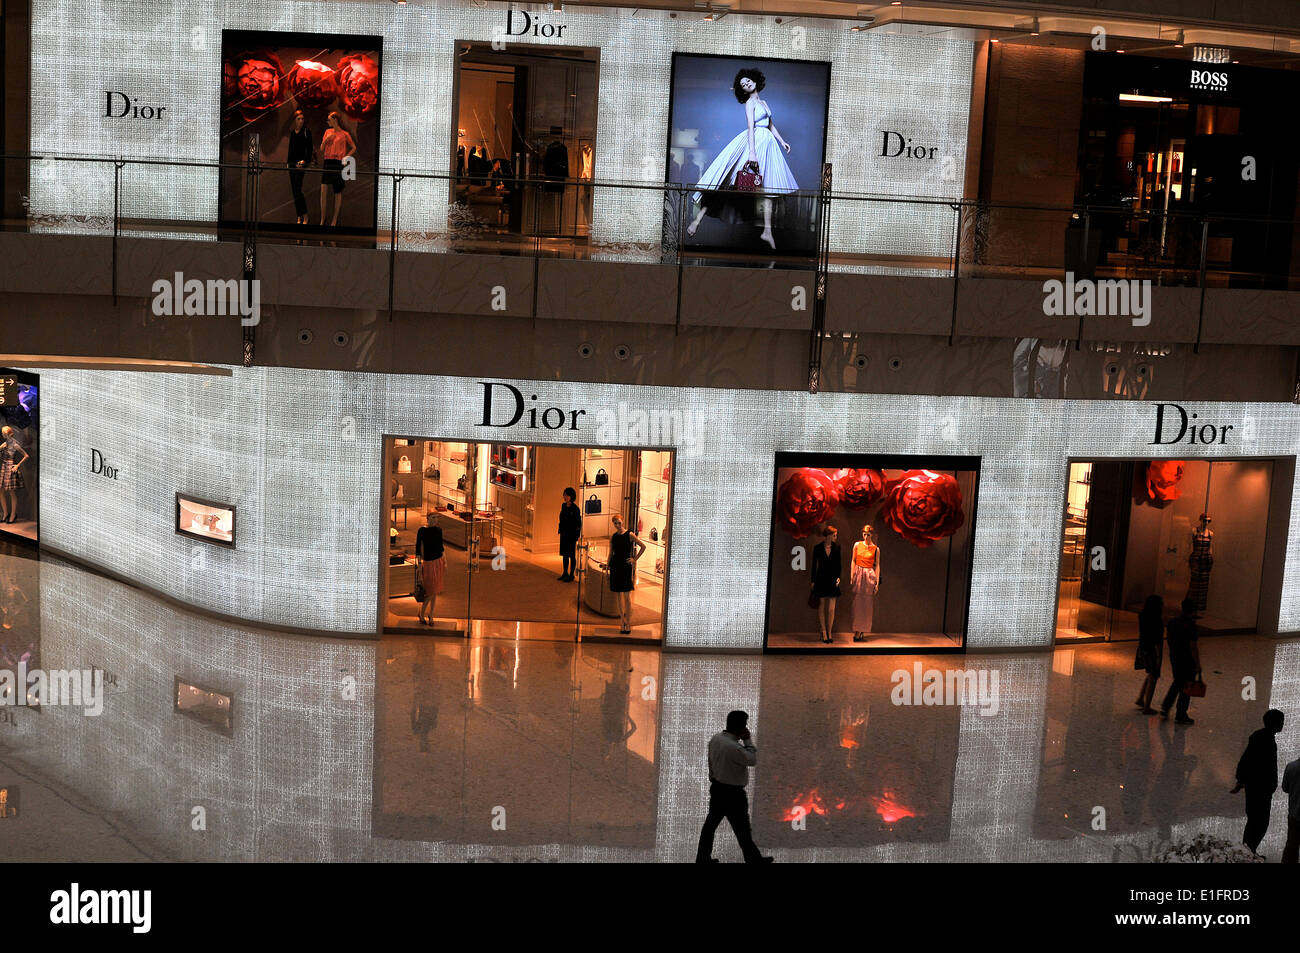 Dior Boutique Ifc Mall Pudong Shanghai China Stockfoto